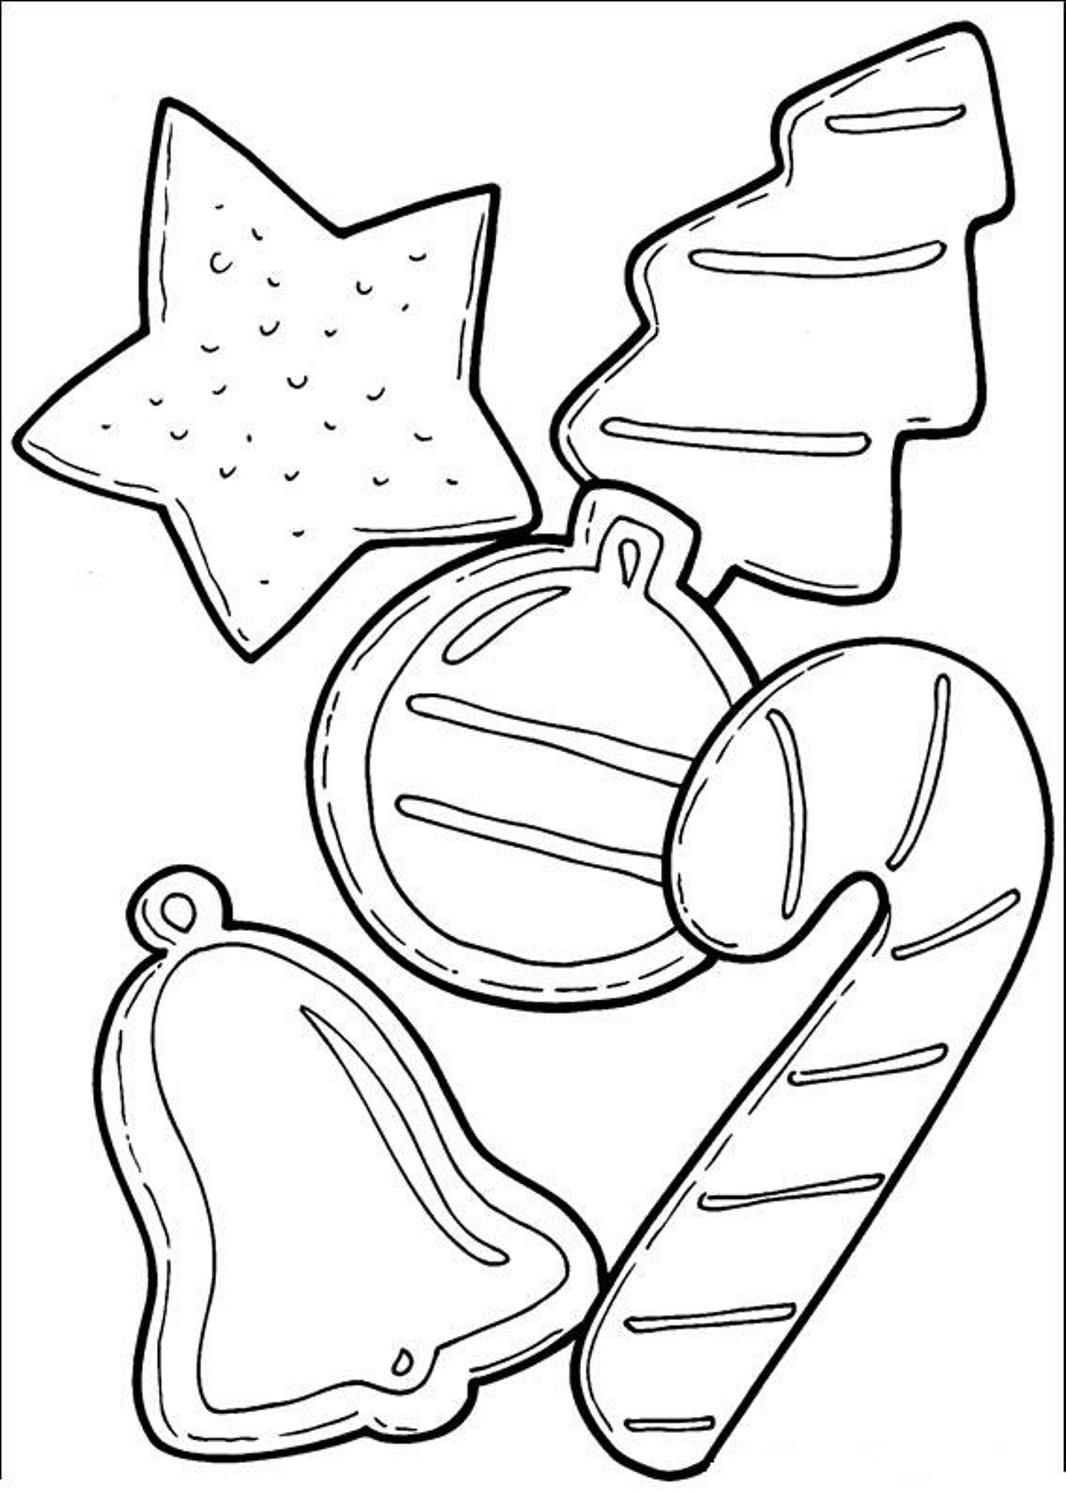 Christmas Cookies Coloring Pages On A Plate - Coloring Pages For ...